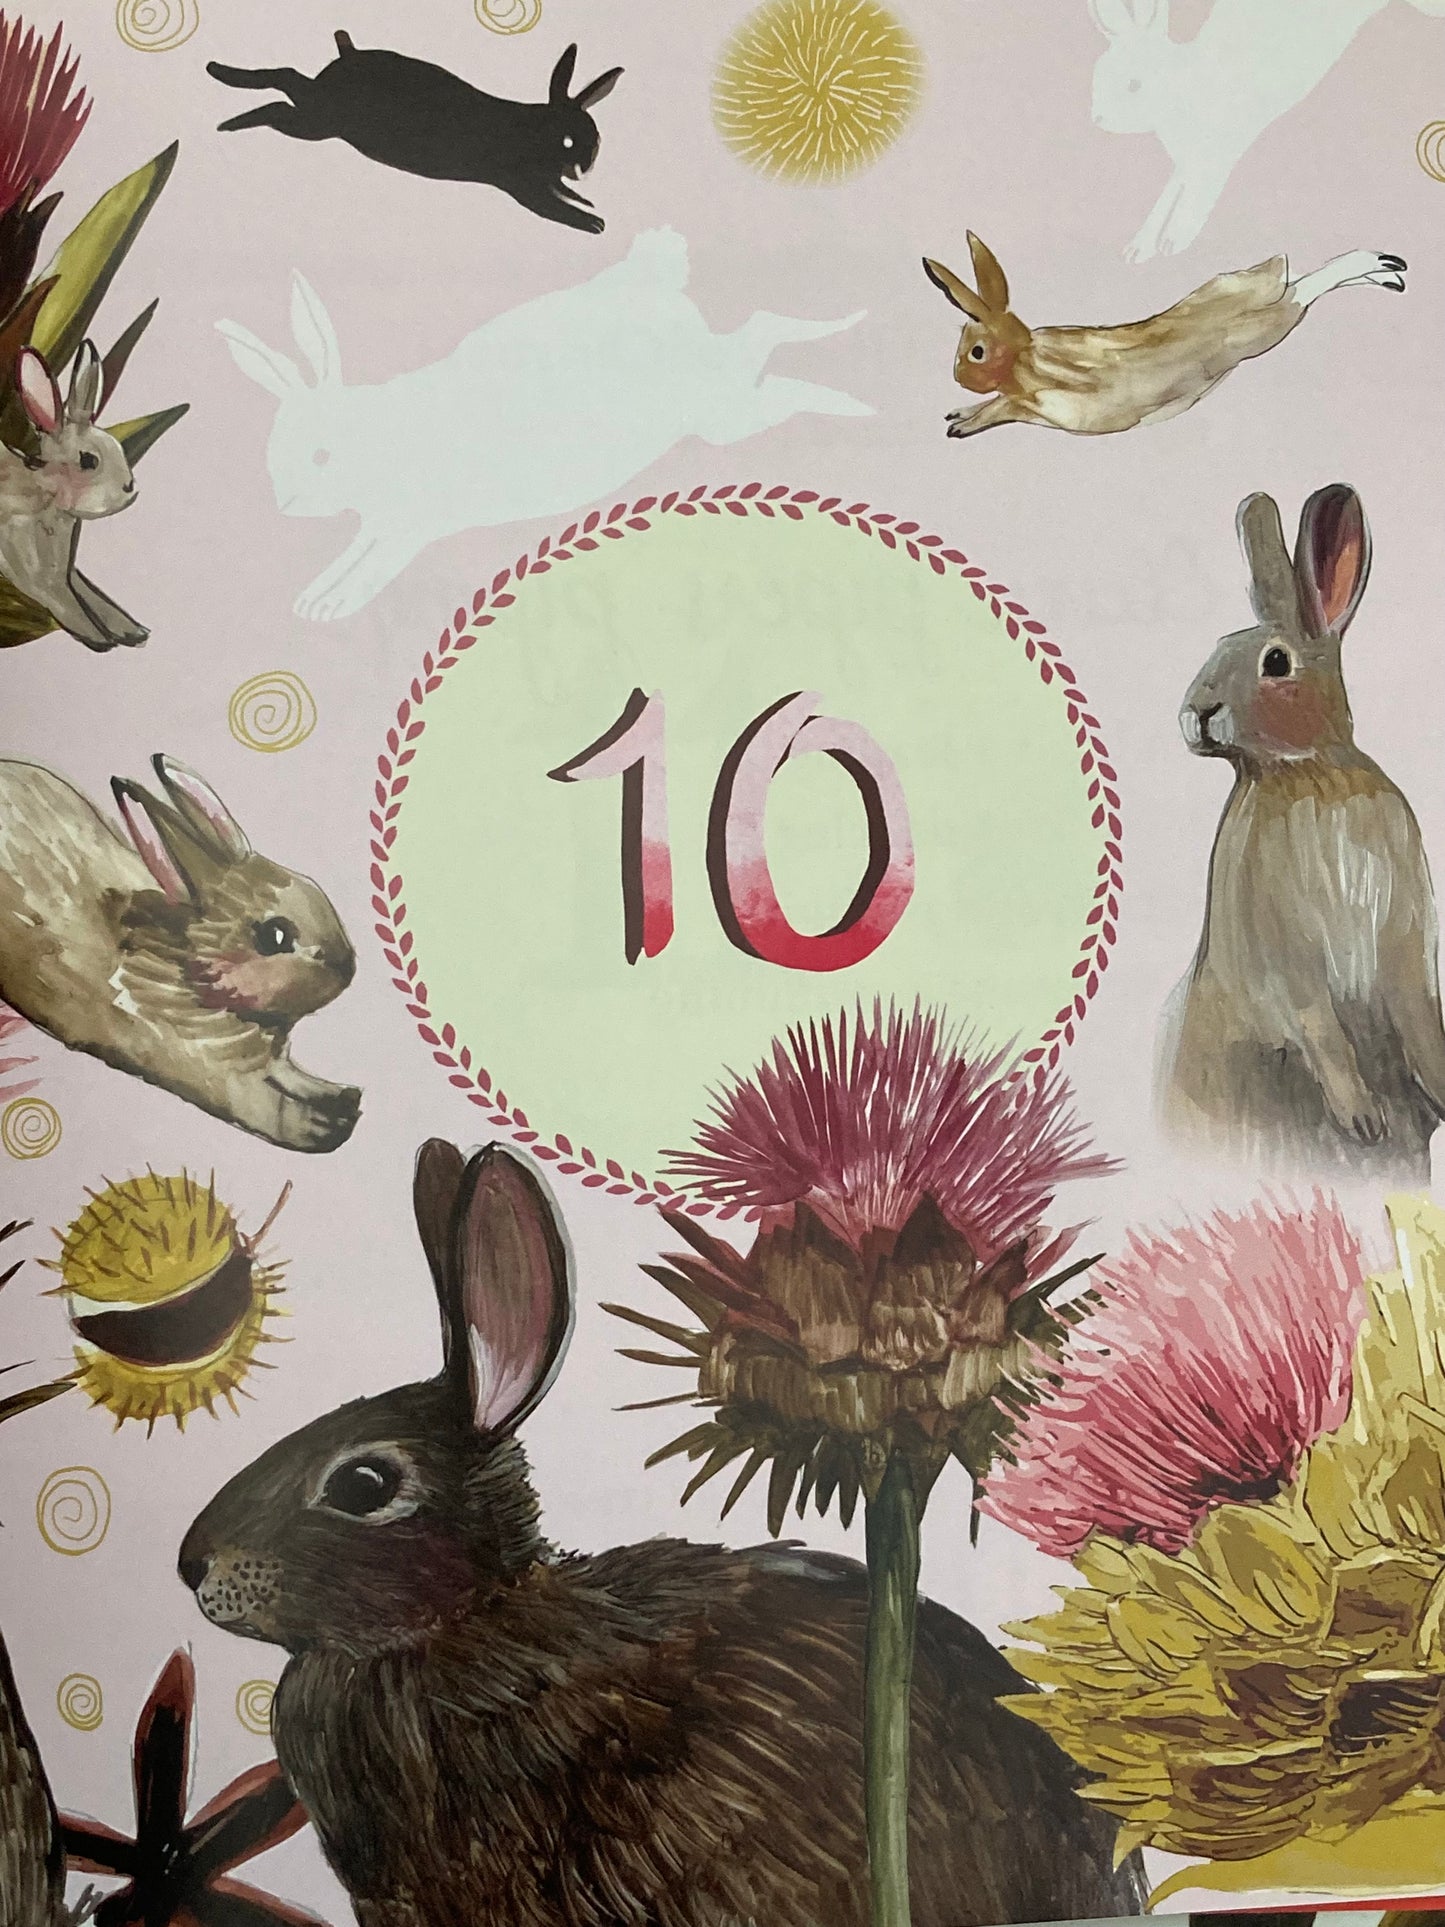 Children's Picture Book - THE TWELVE DAYS OF CHRISTMAS, A Celebration of Nature